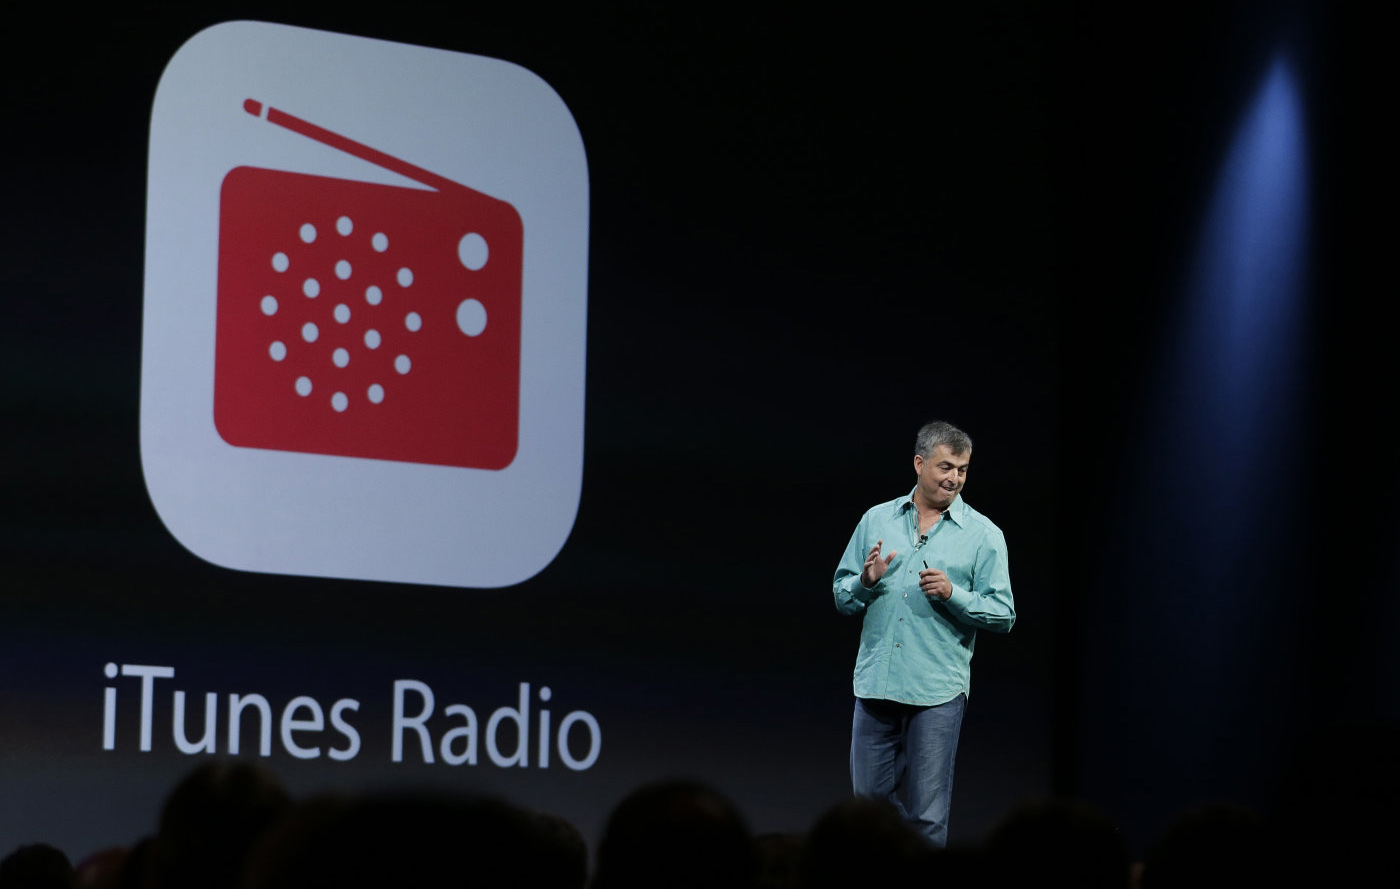 Apple ends its free iTunes Radio service